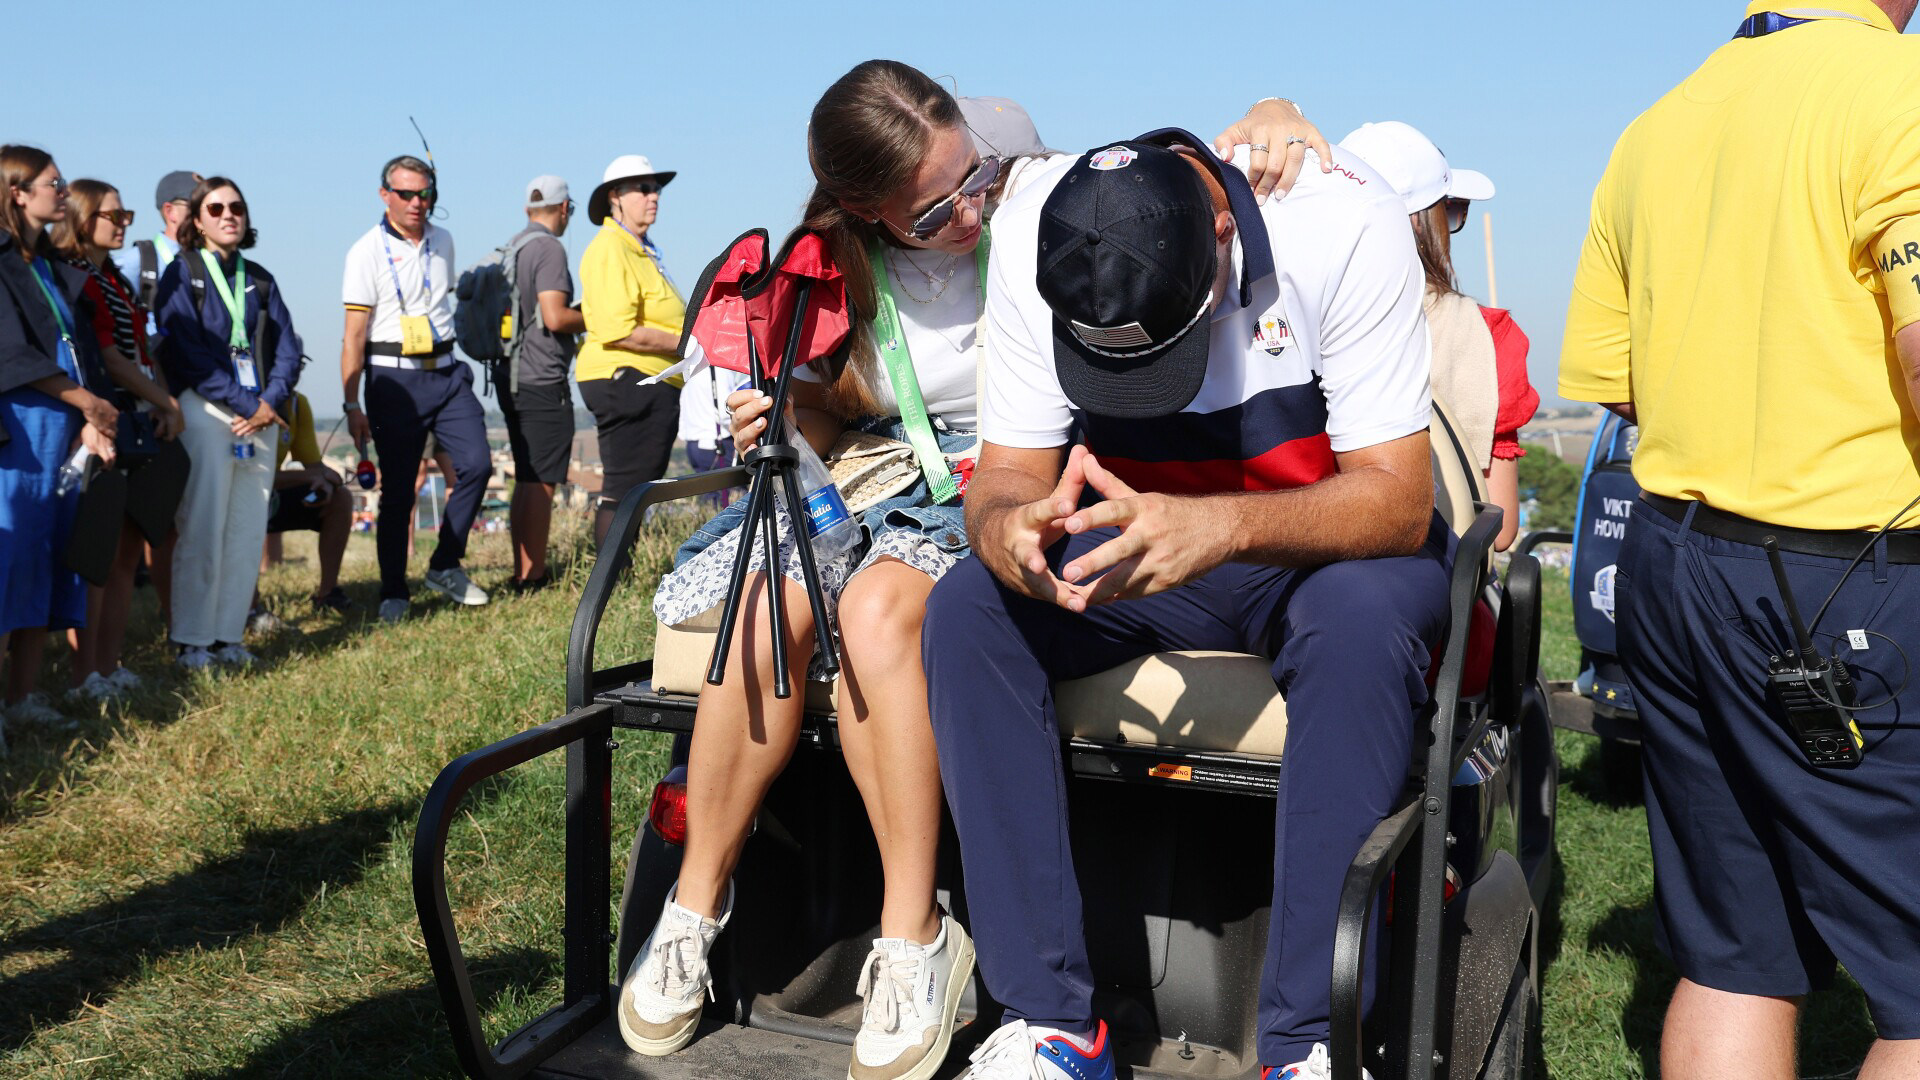 Scheffler, Koepka routed in record fashion, 9 and 7, at Ryder Cup